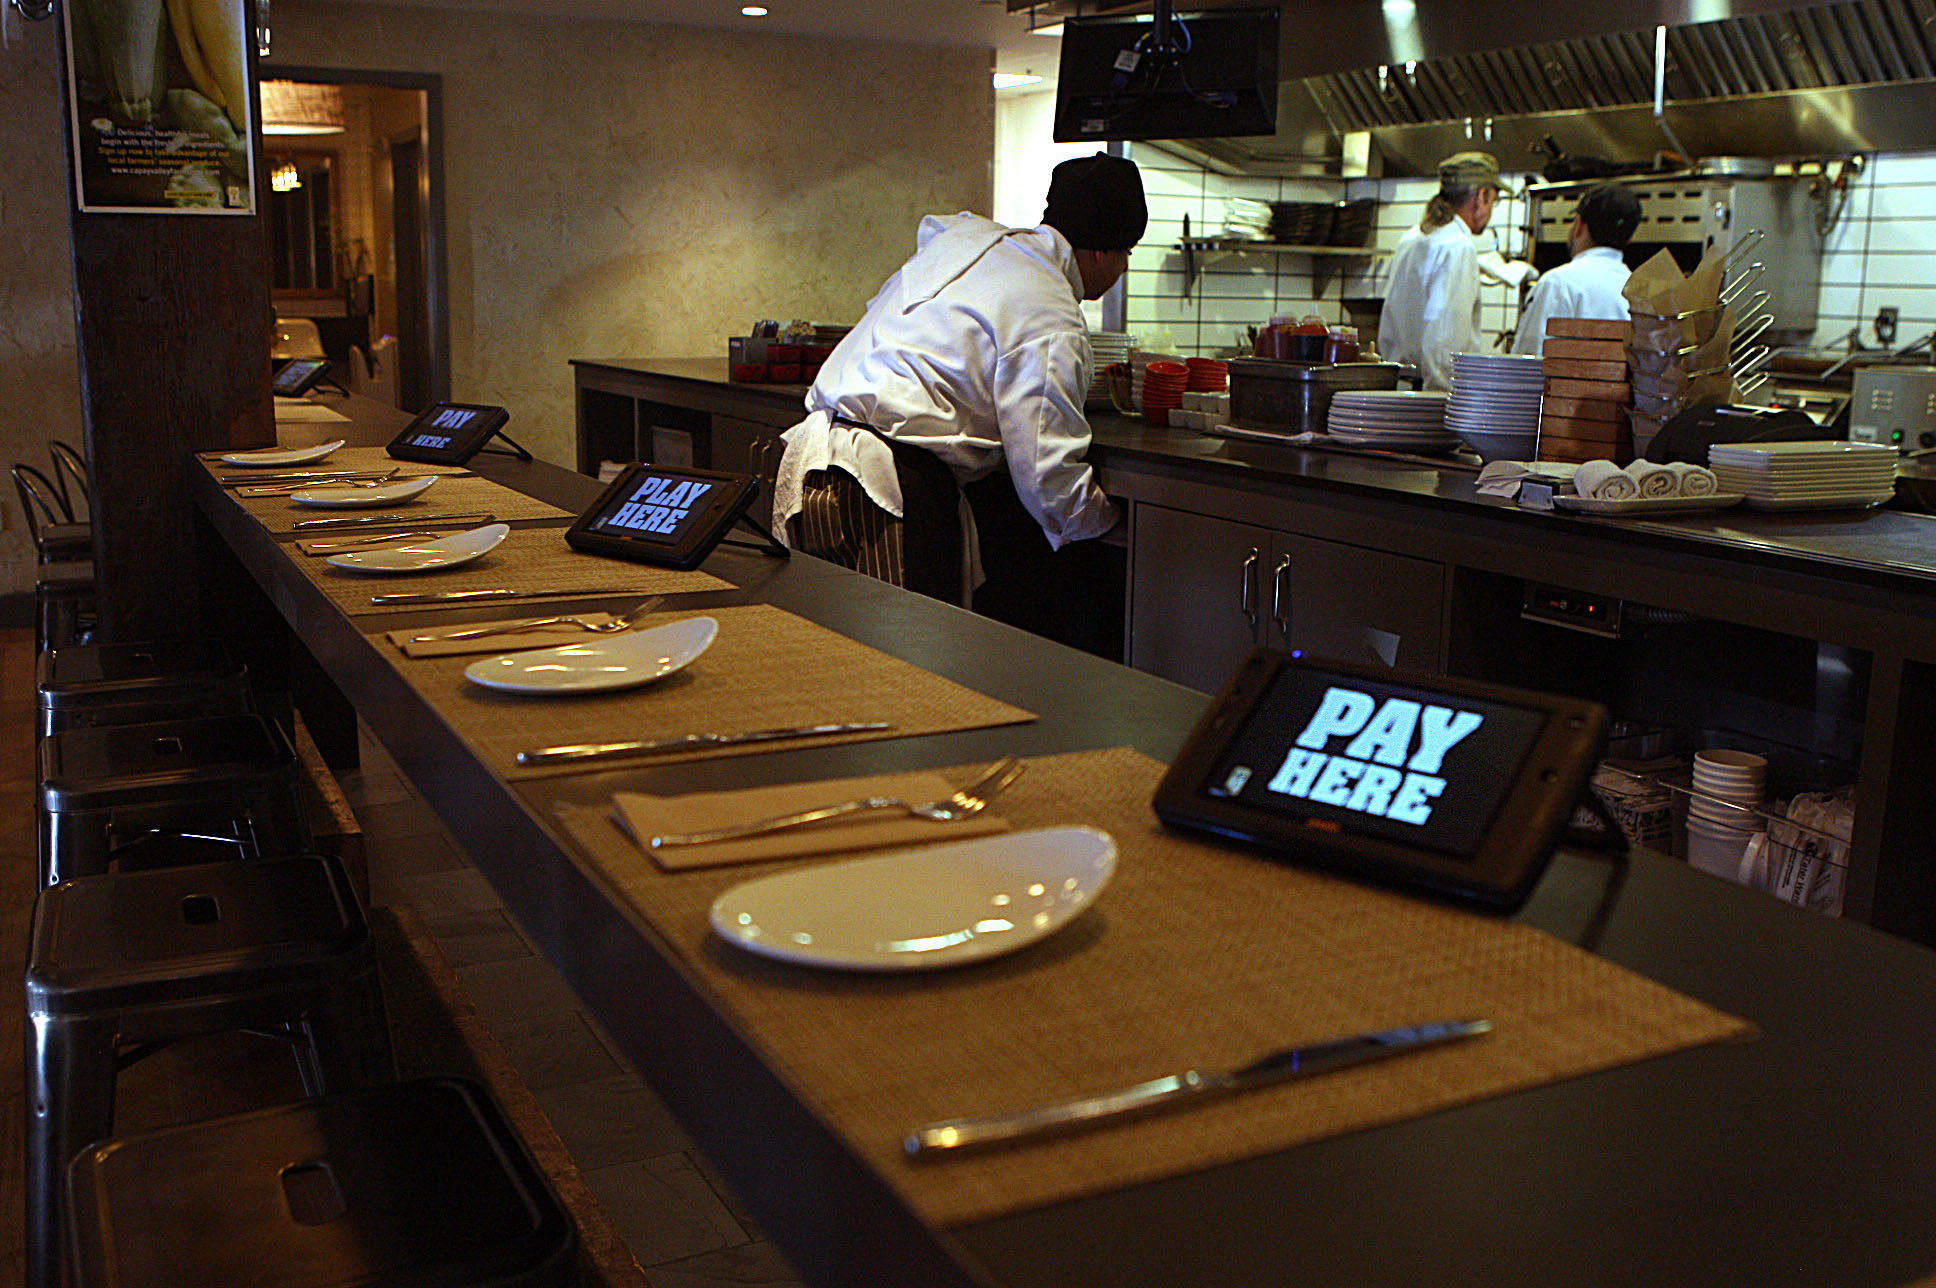 A restaurant counter with place settings of plates and silverware is shown. Tablets displaying "PAY HERE" are placed at intervals. In the background, chefs work in an open kitchen.